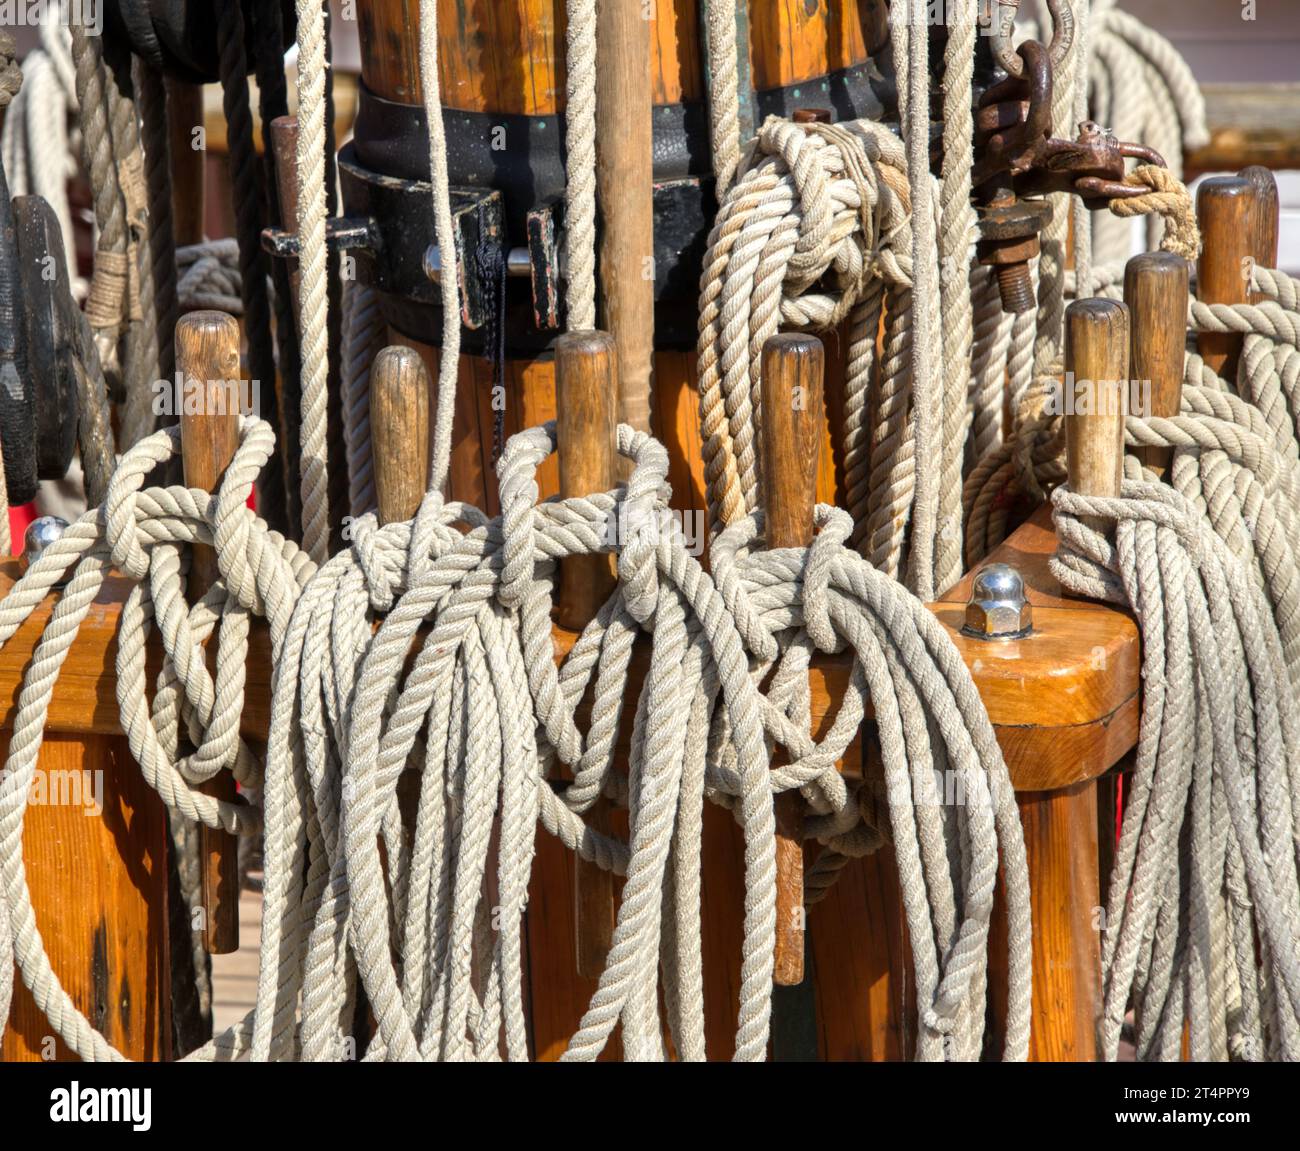 The focus is on the various ropes, knots, and pulleys of a sailing ship Stock Photo